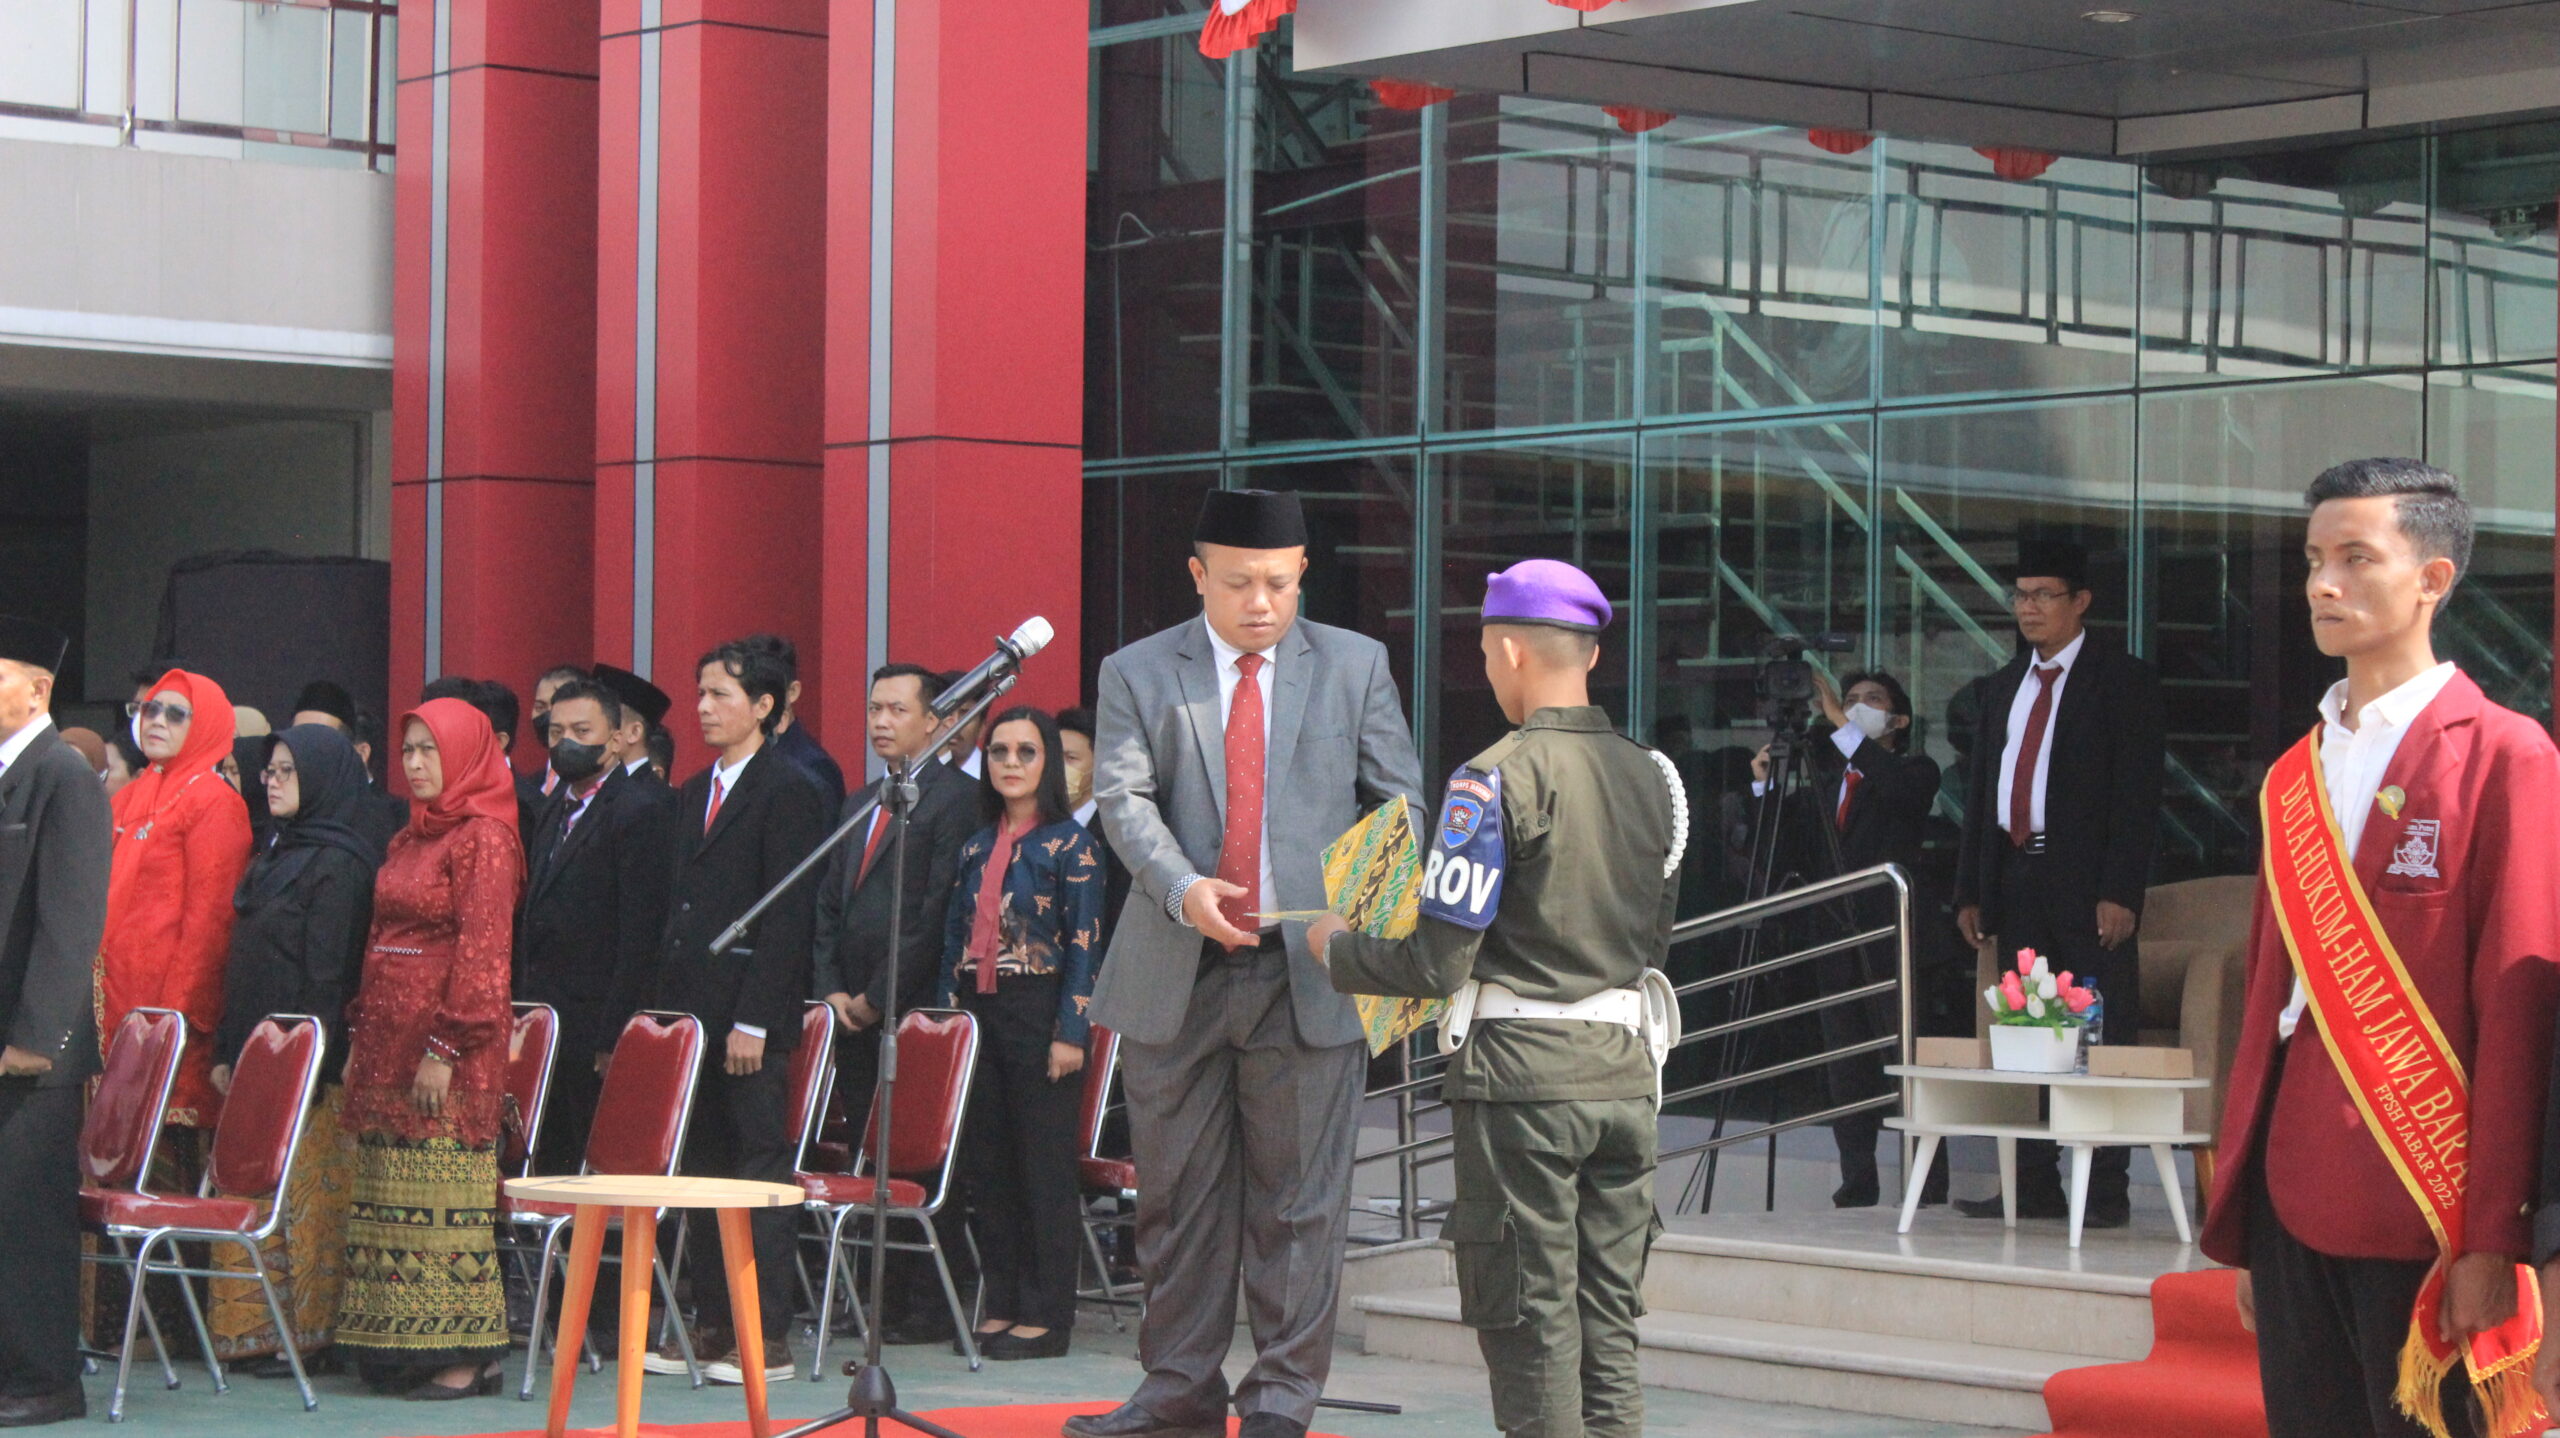 Commemorating The Independence Day, Nusa Putra University held the 77th RI Anniversary Ceremony